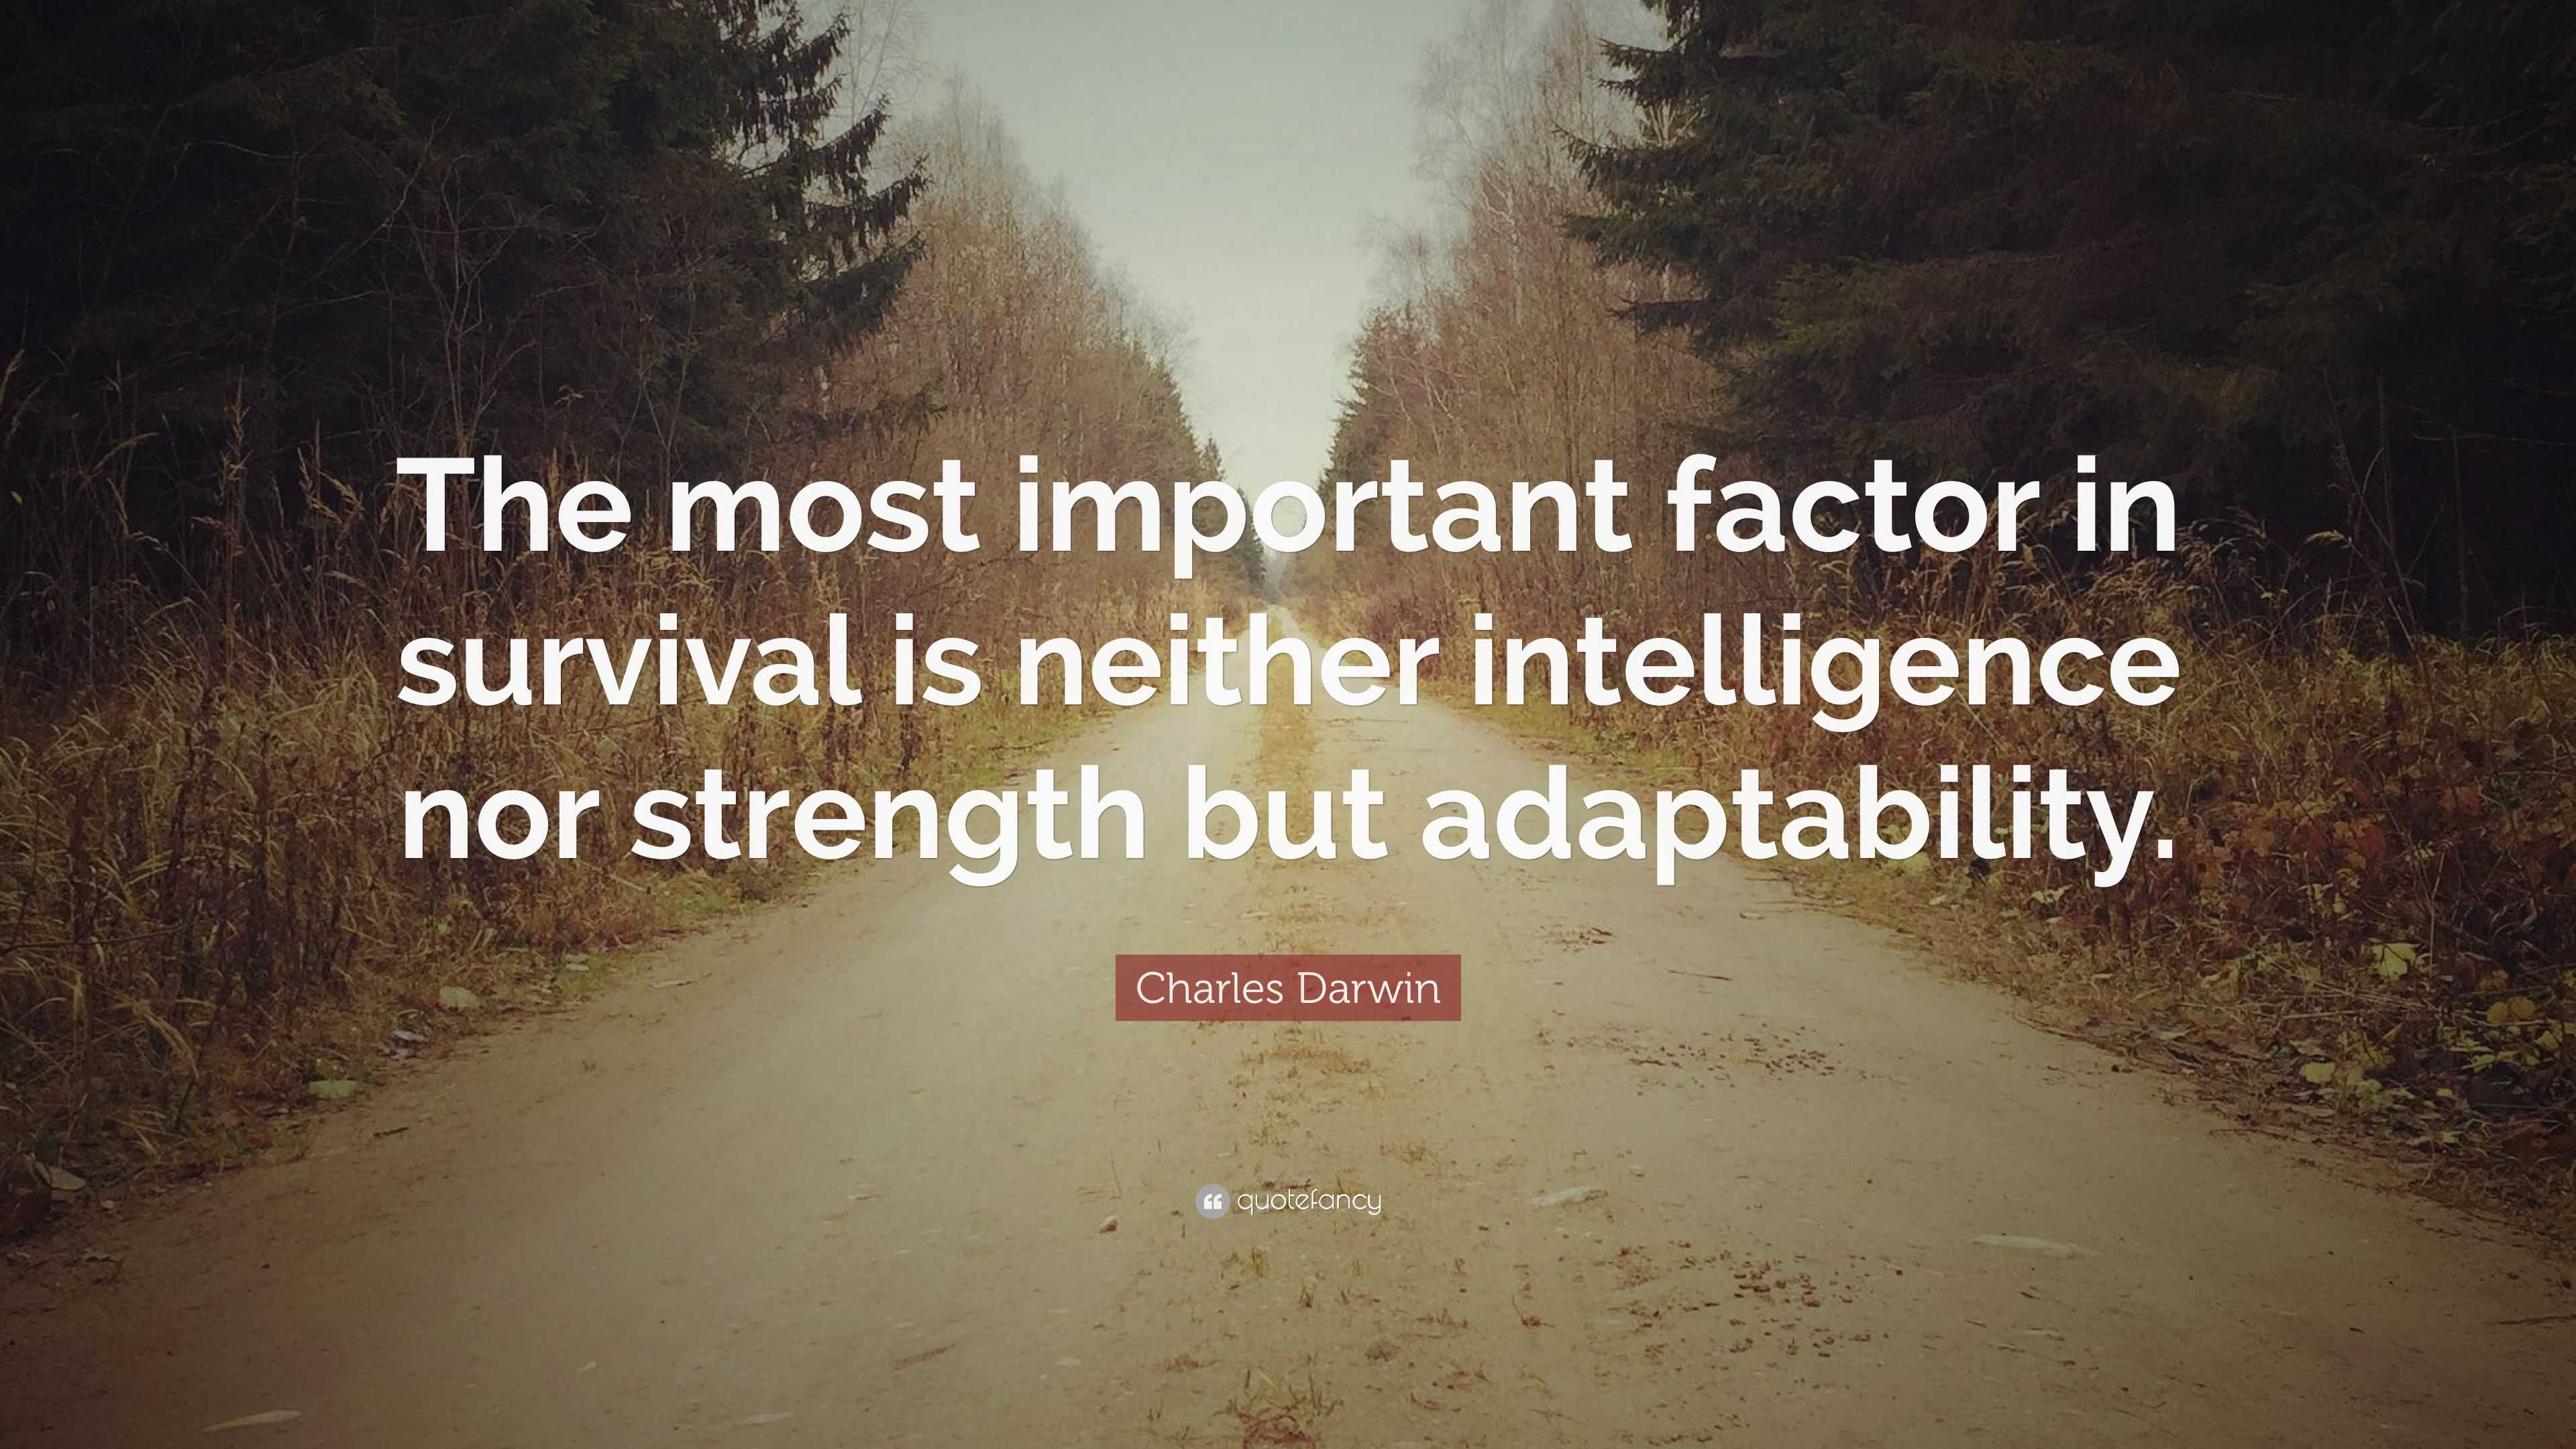 Charles Darwin Quote: “The most important factor in survival is neither intelligence ...